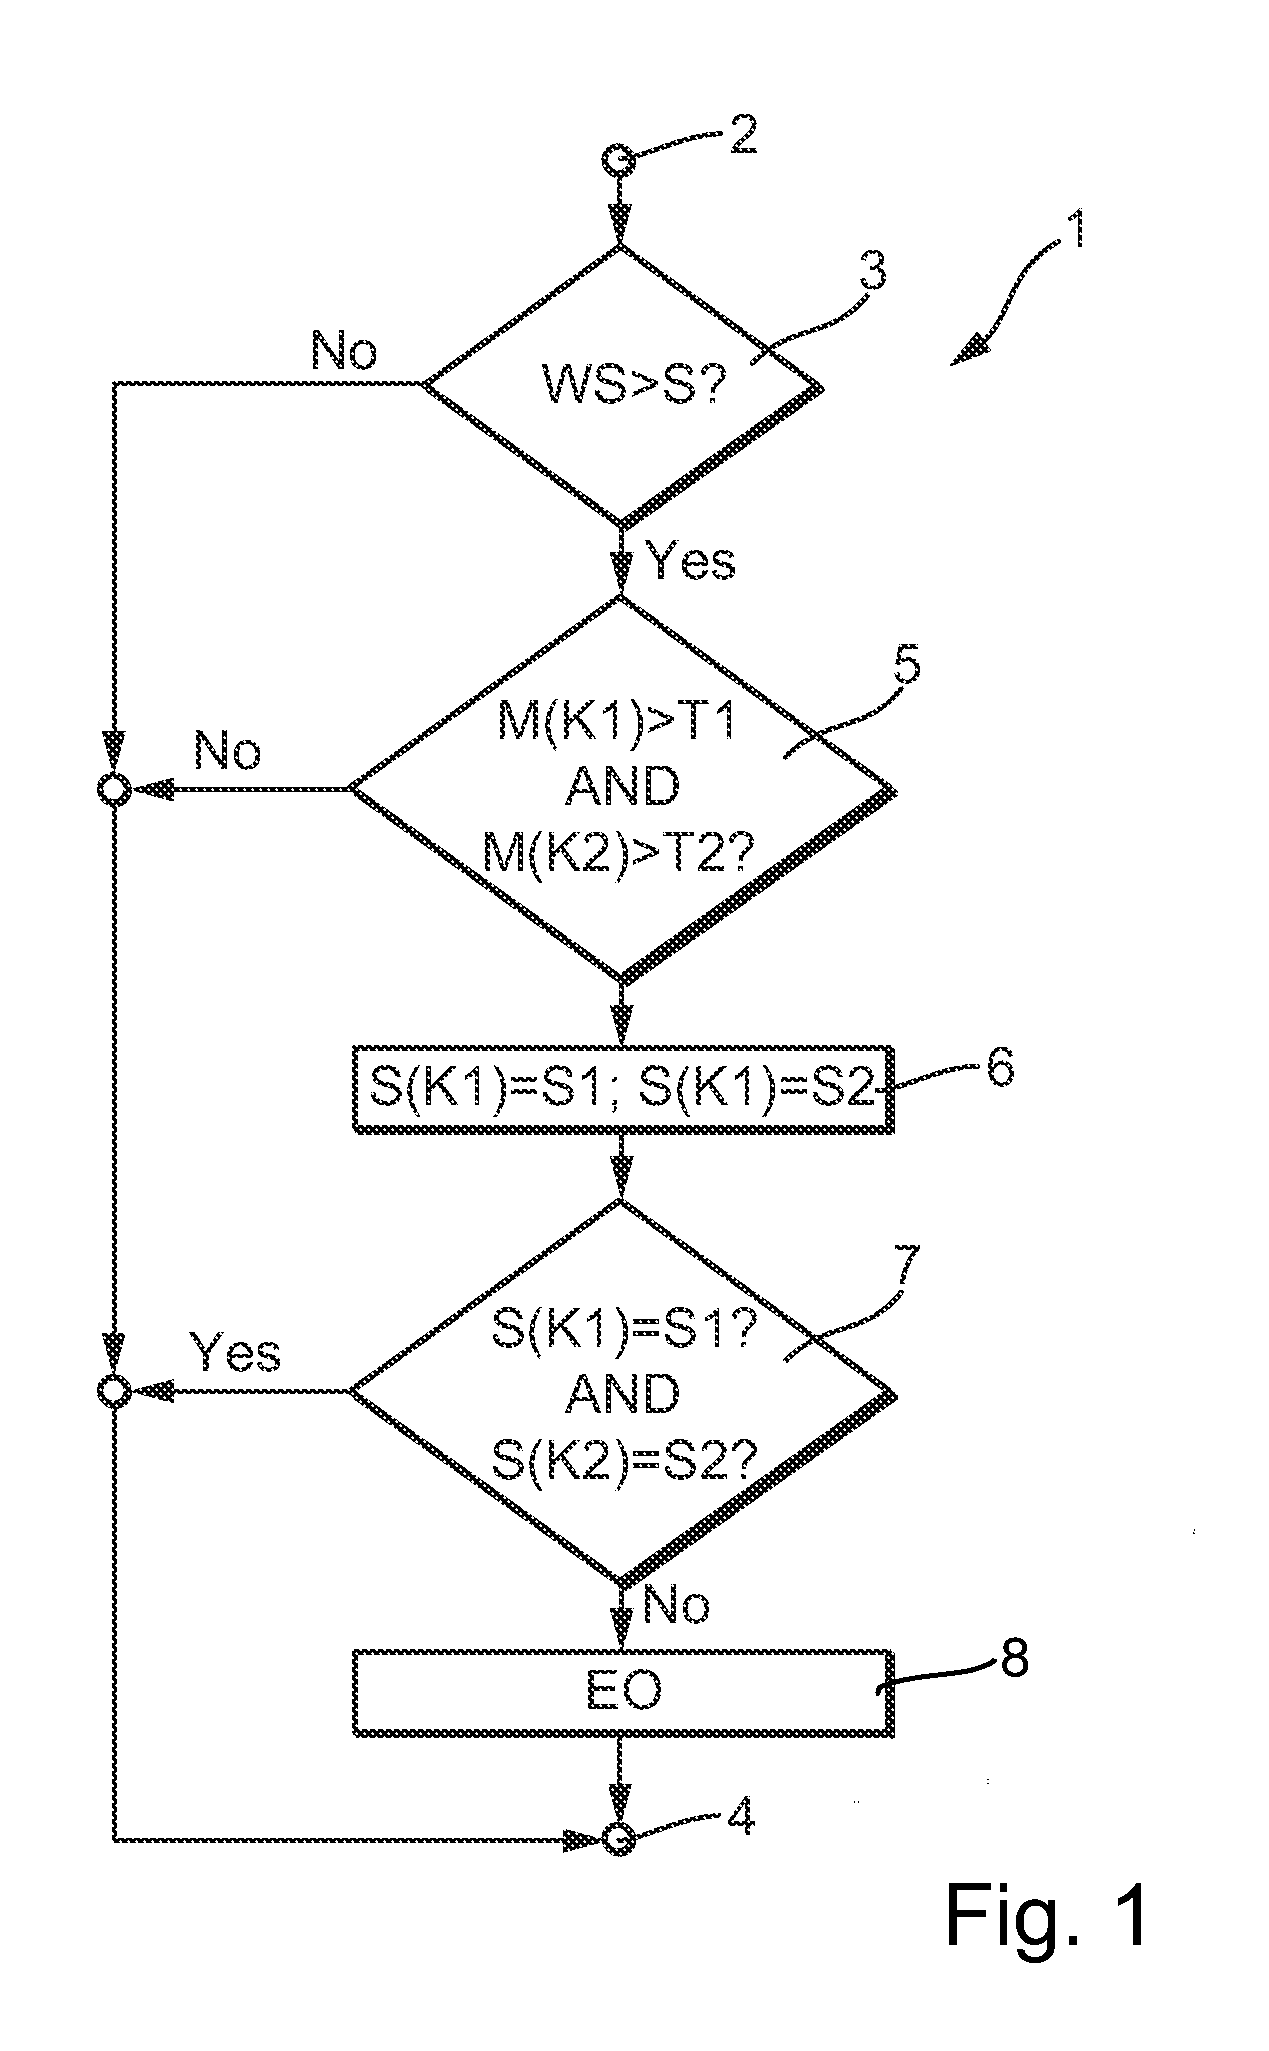 Method for controlling a dual clutch transmission